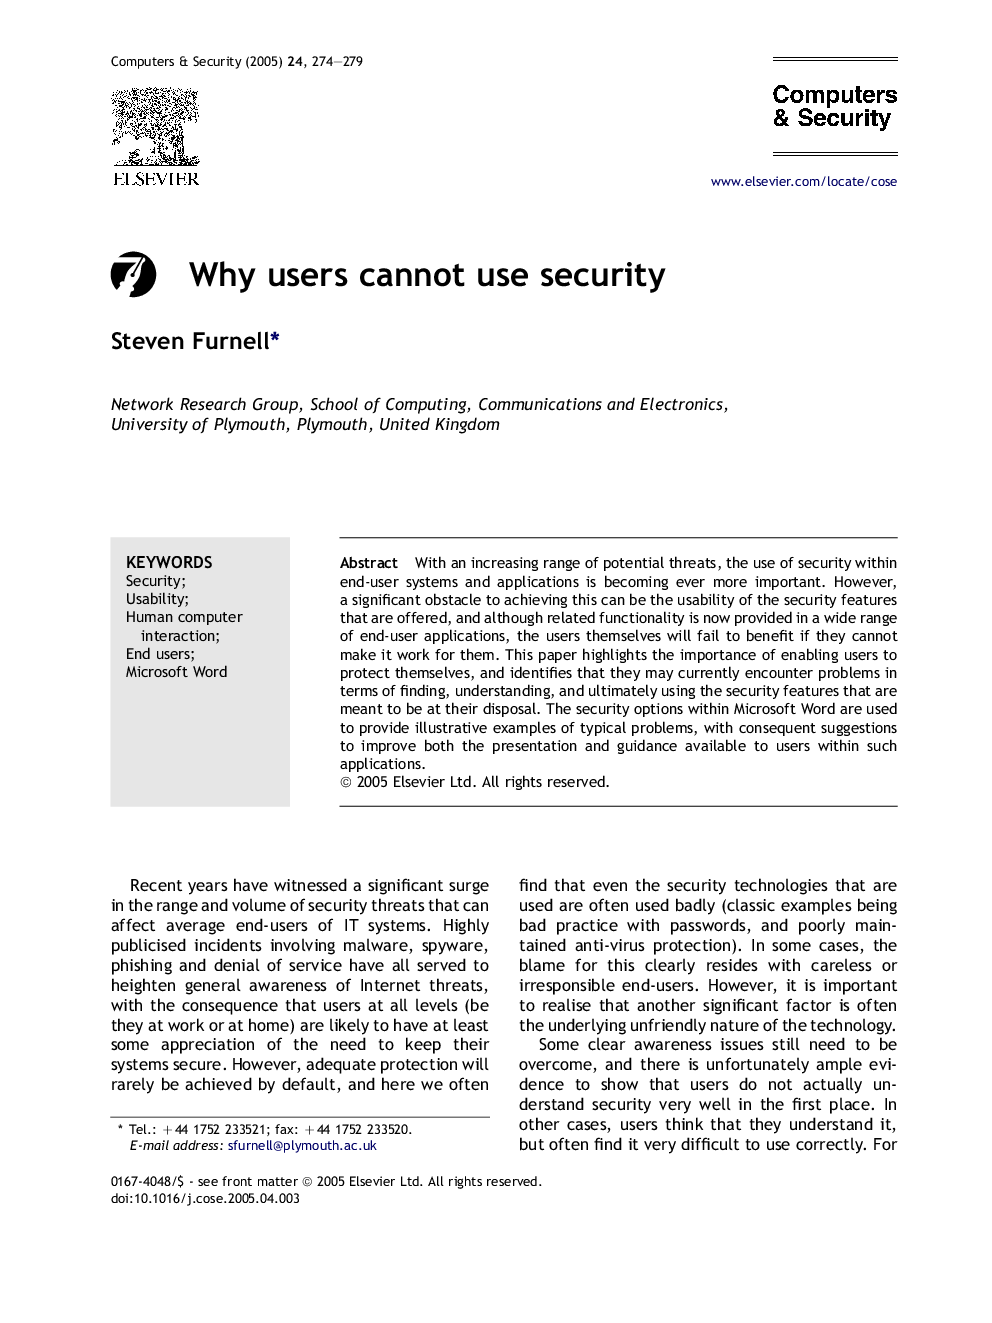 Why users cannot use security